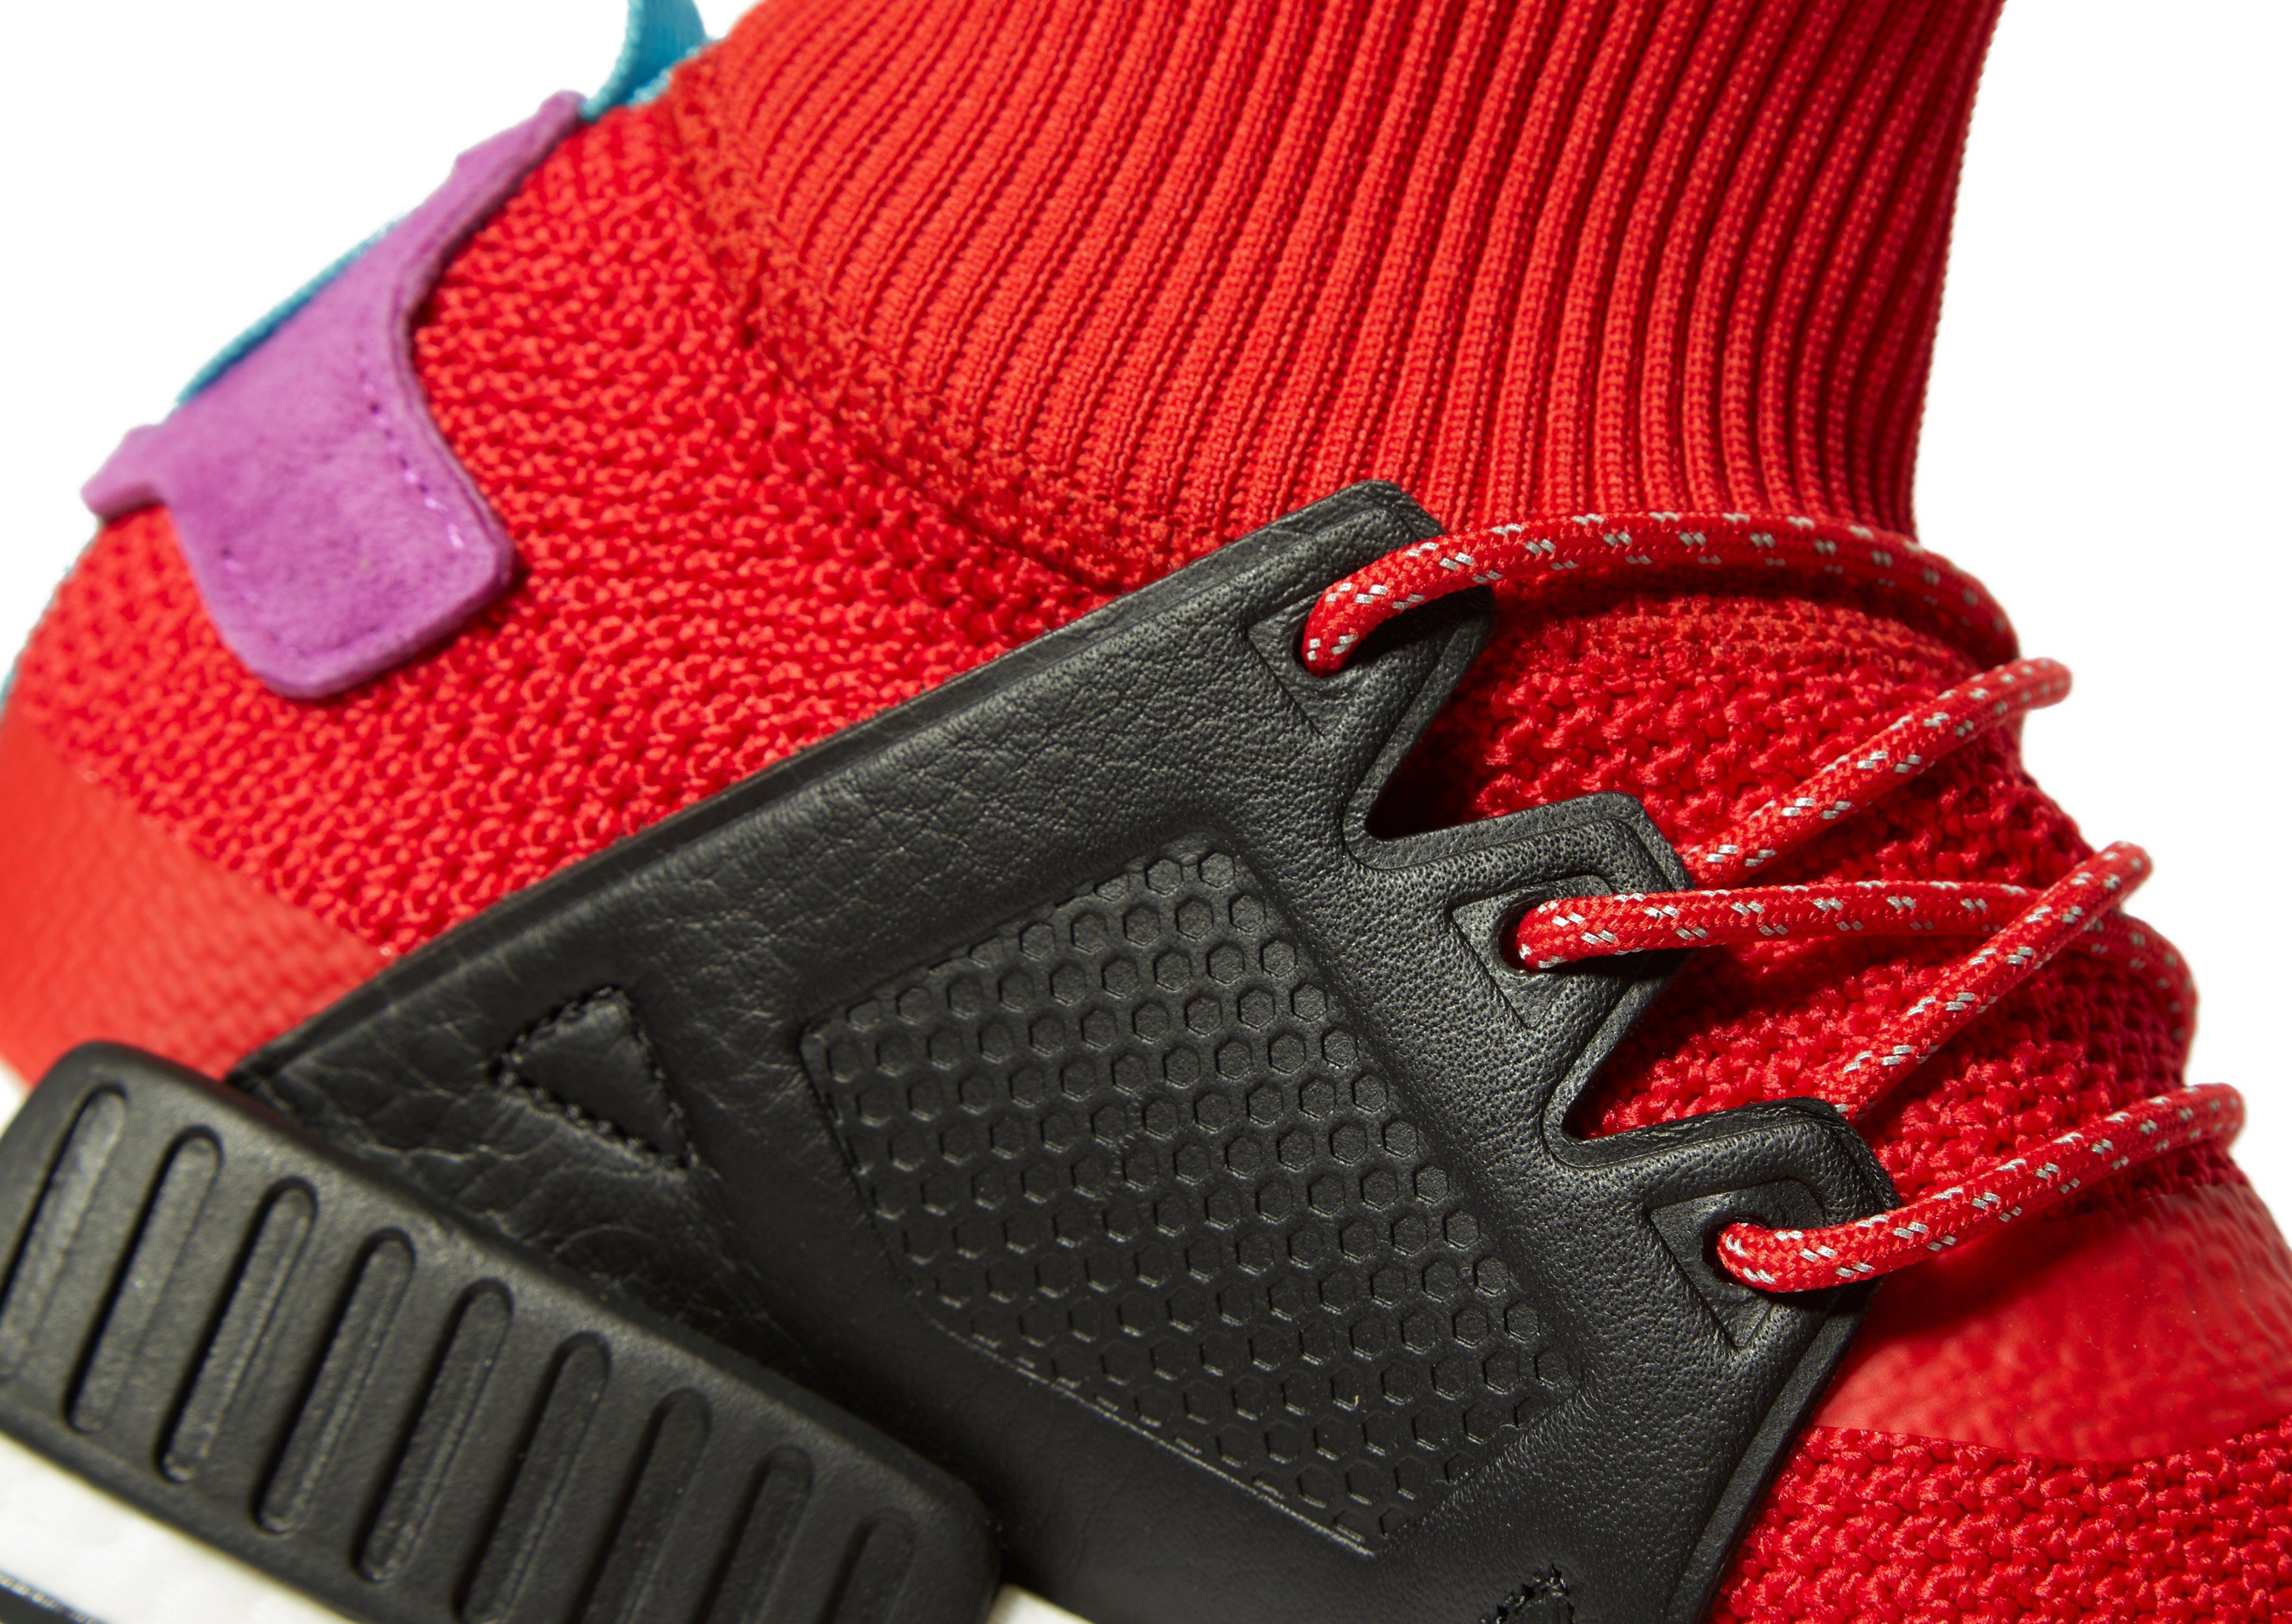 nmd xr1 winter red